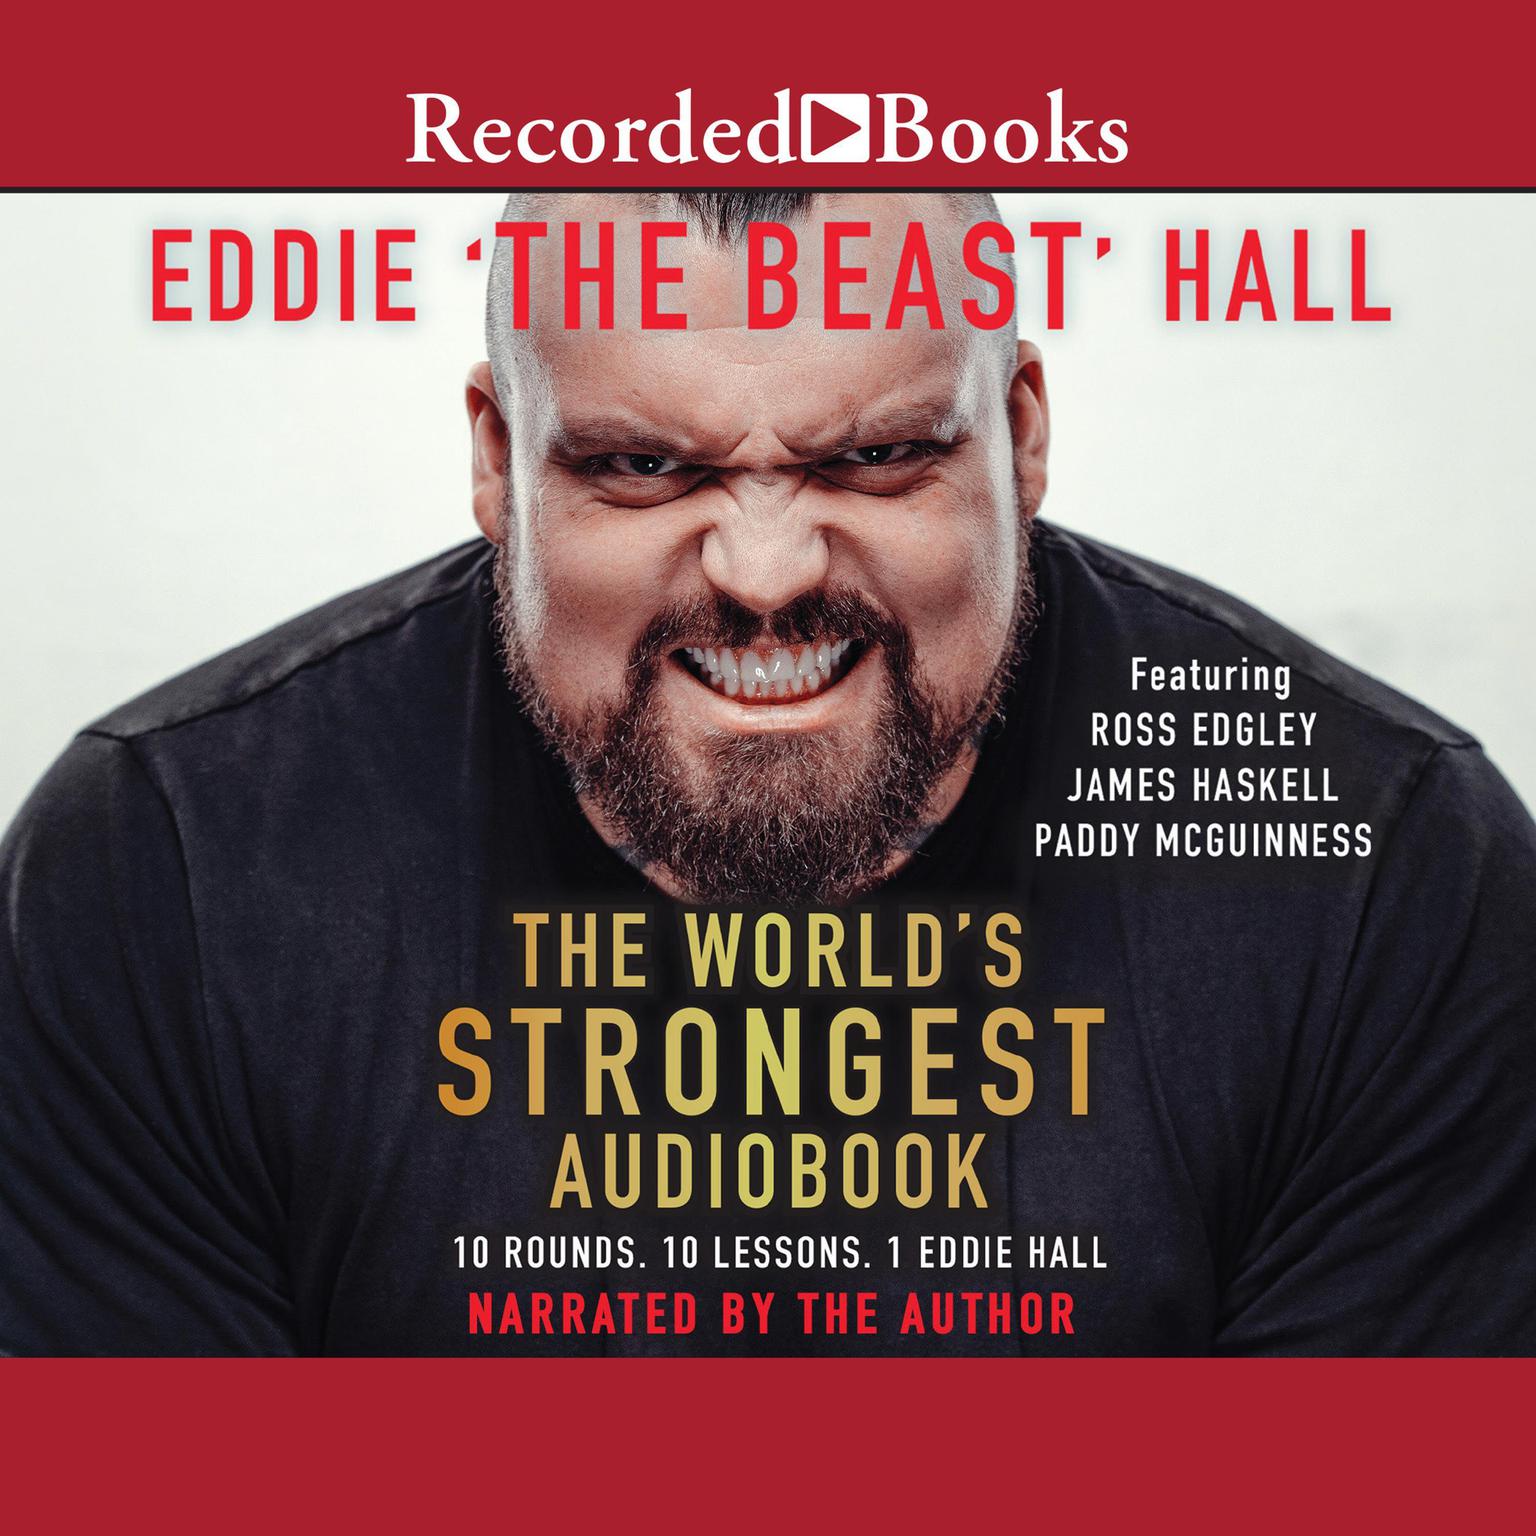 The Worlds Strongest Audiobook: 10 Rounds, 10 Lessons, 1 Eddie Hall Audiobook, by Eddie “The Beast” Hall